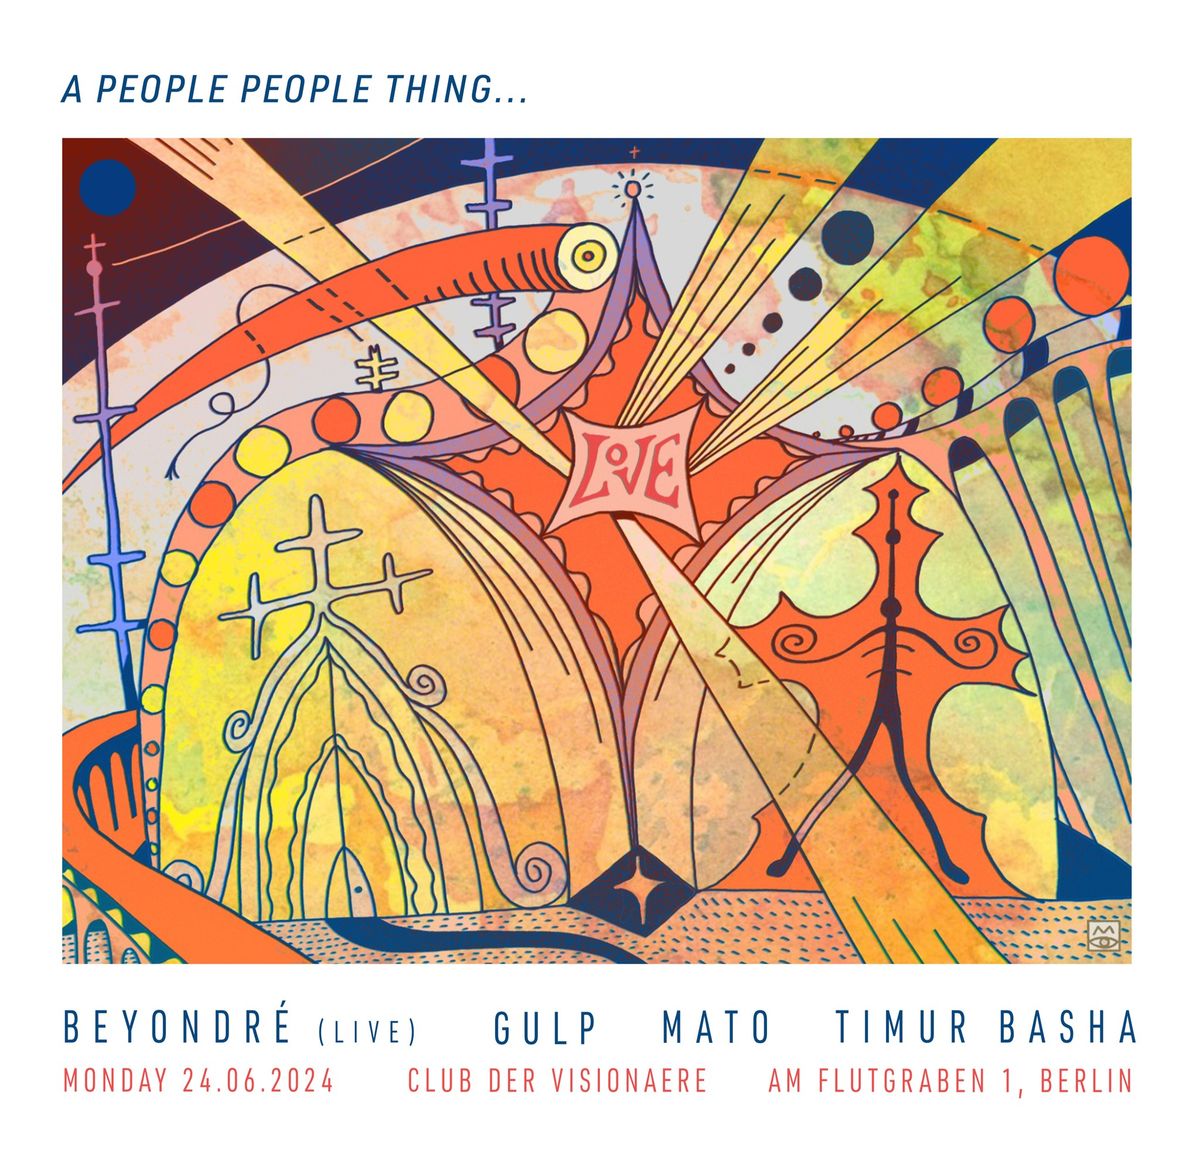 A People People Thing...